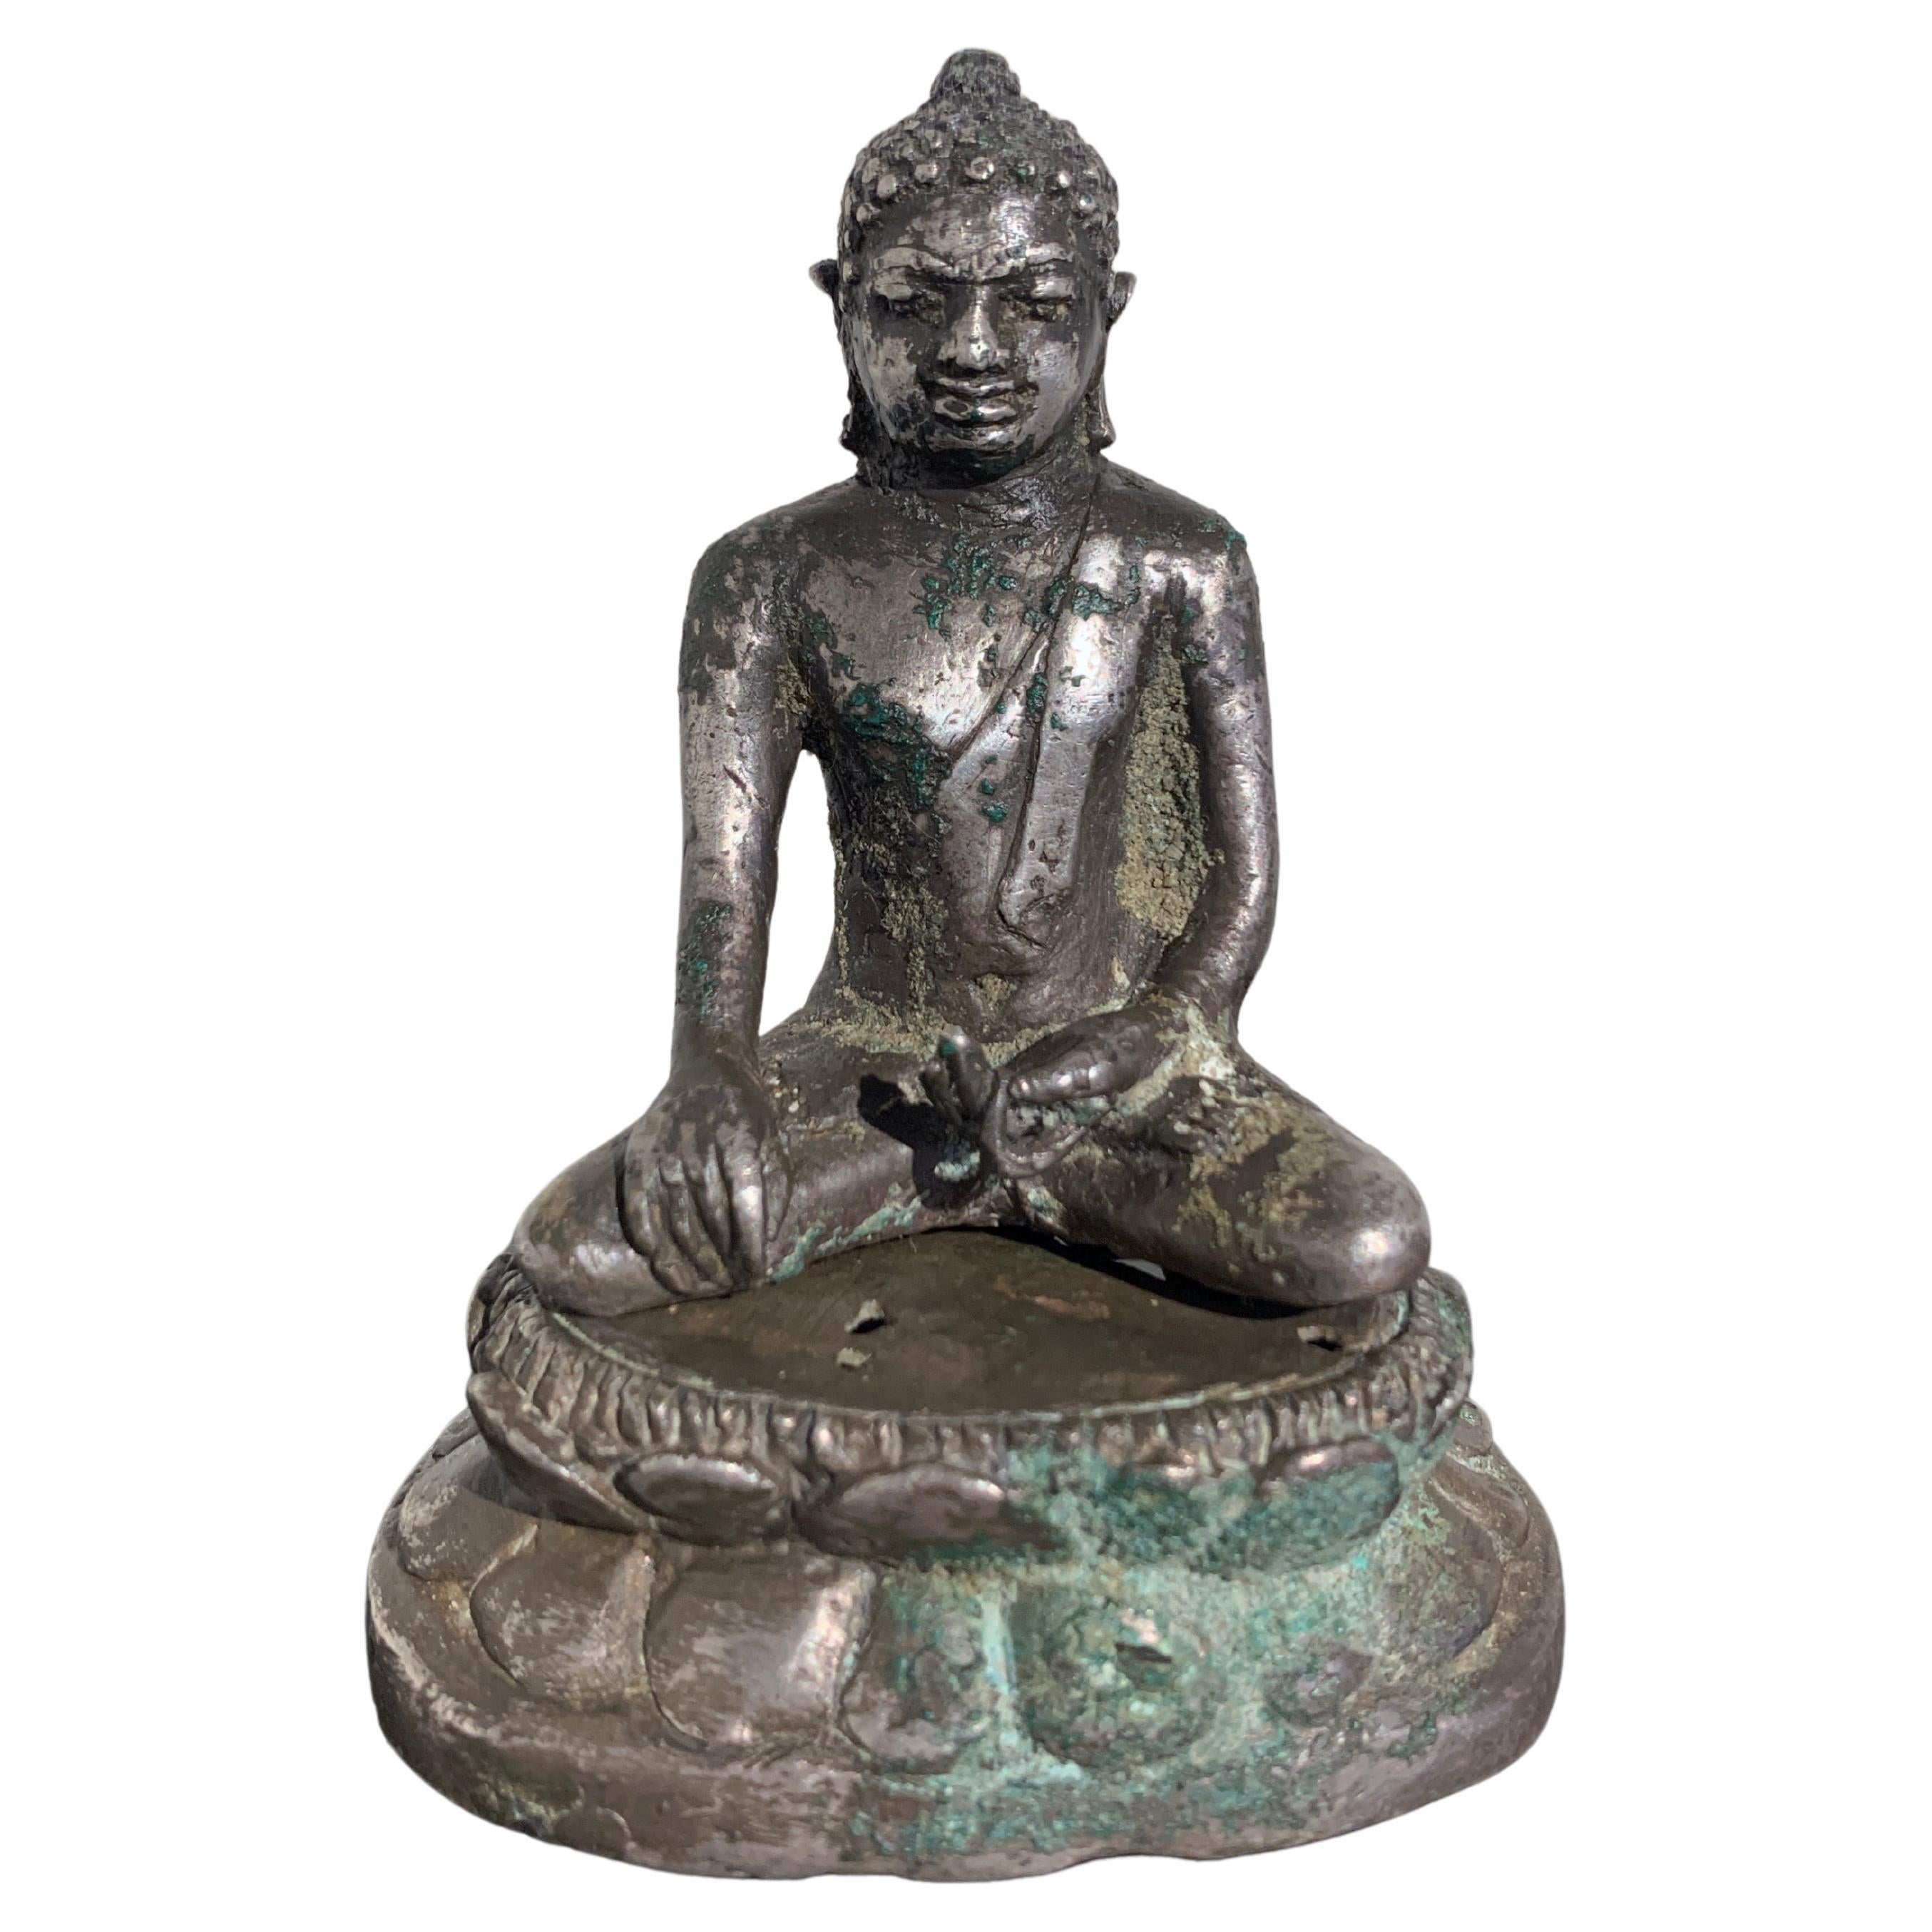 Central Javanese Cast Silver Transcendent Buddha, 9th-12th Century, Indonesia